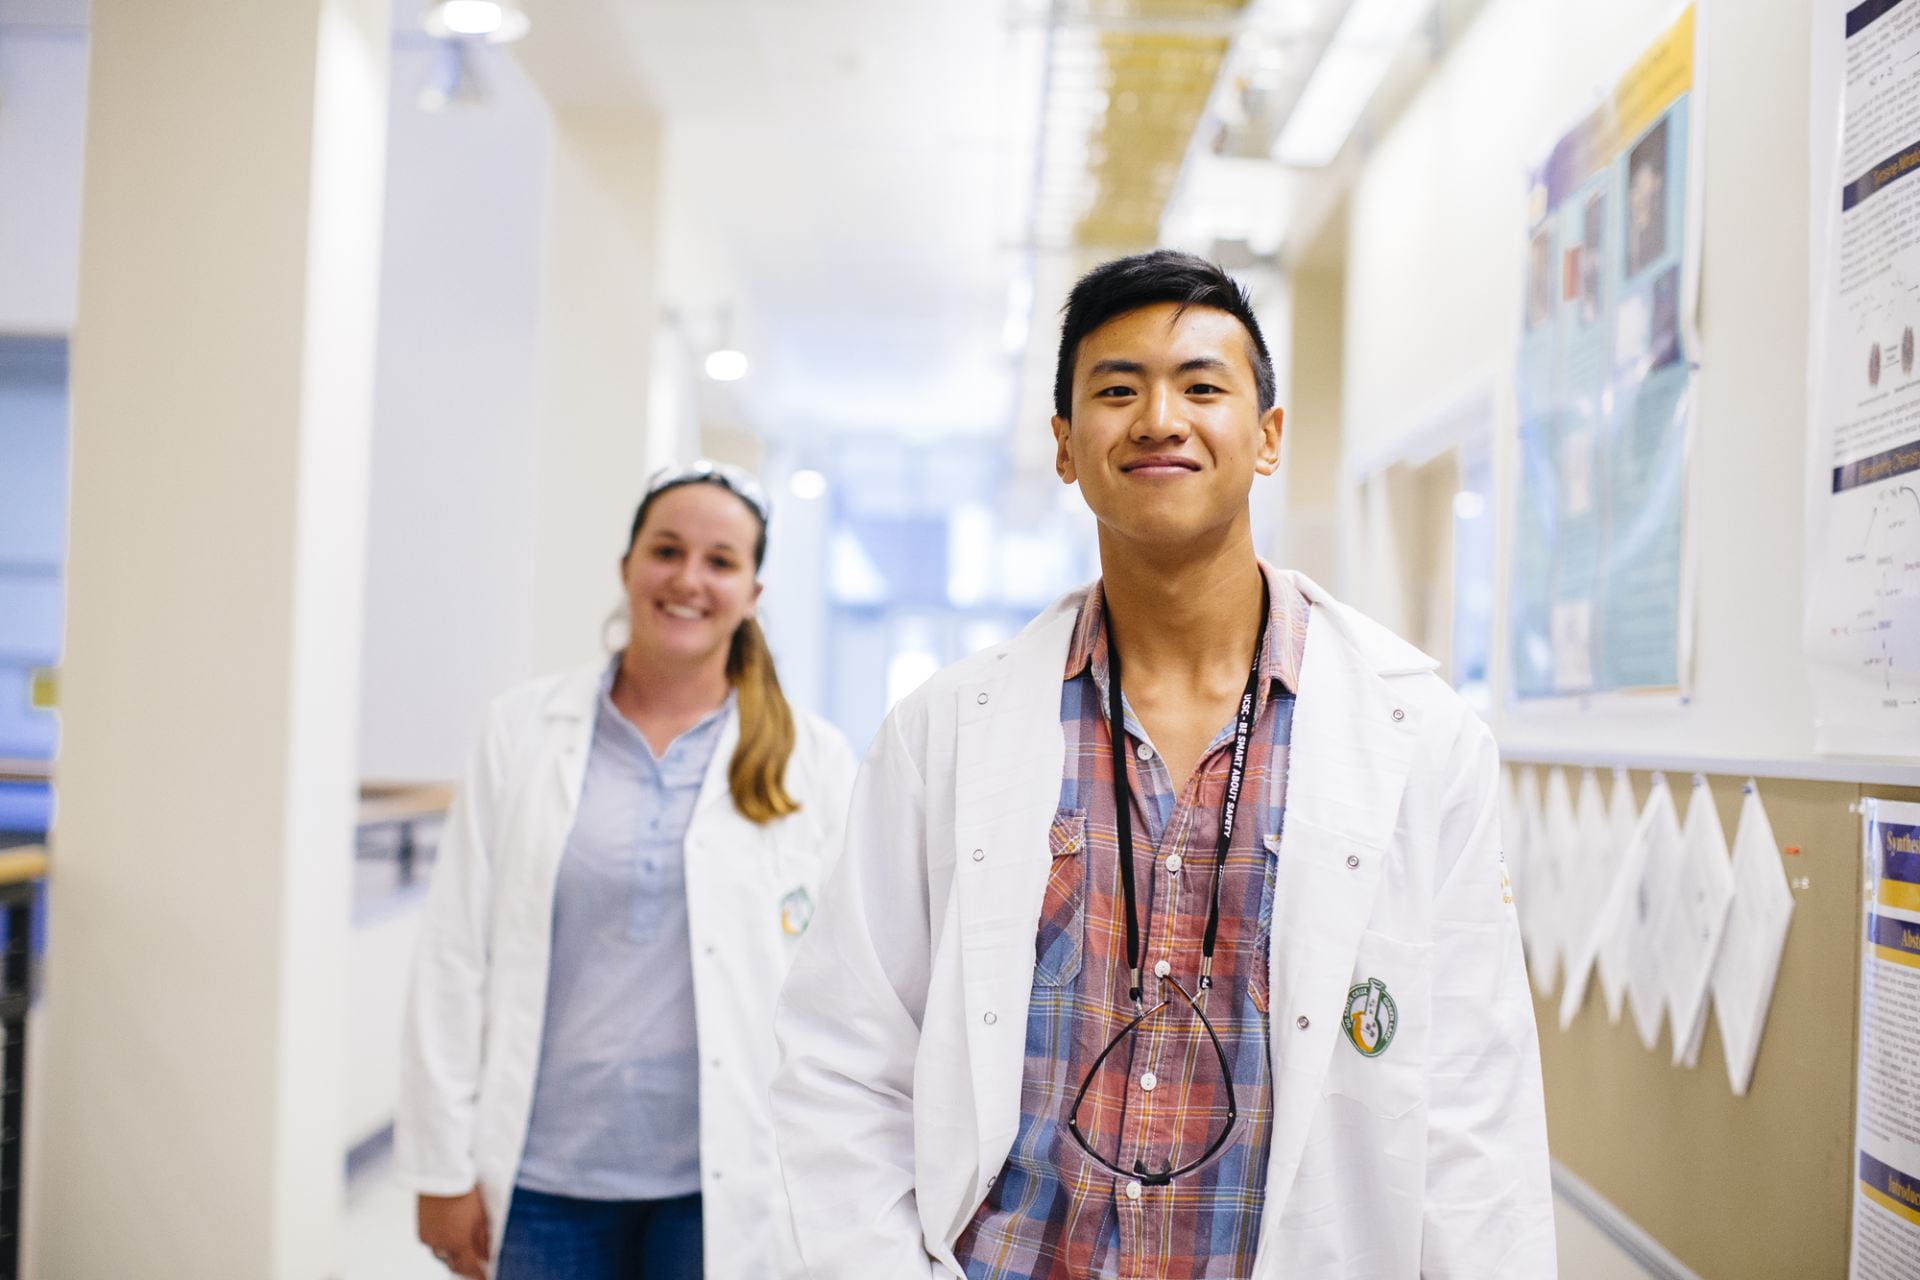 Two student in white lab coats walking down a hallway smiling.